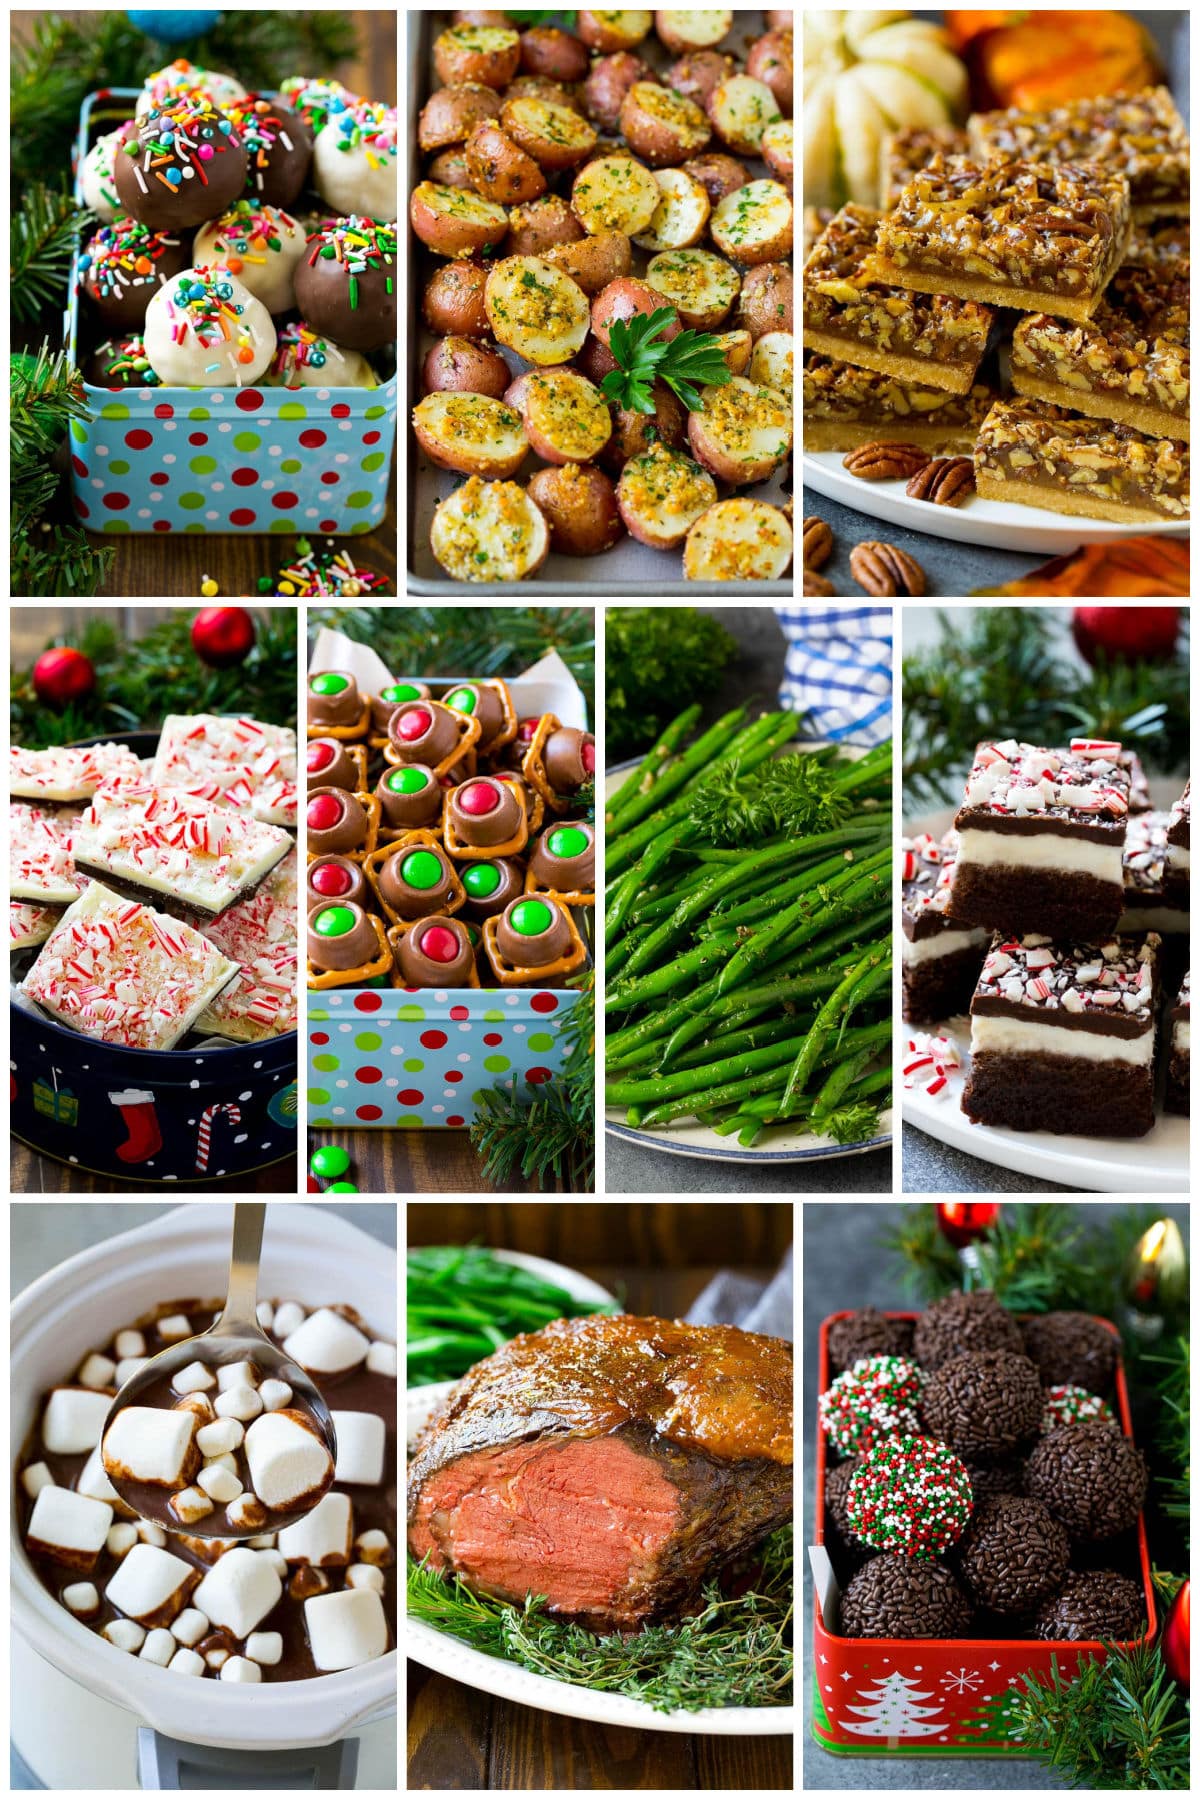 A collection of images of holiday dishes like smoked prime rib, peppermint bark and pecan pie bars.